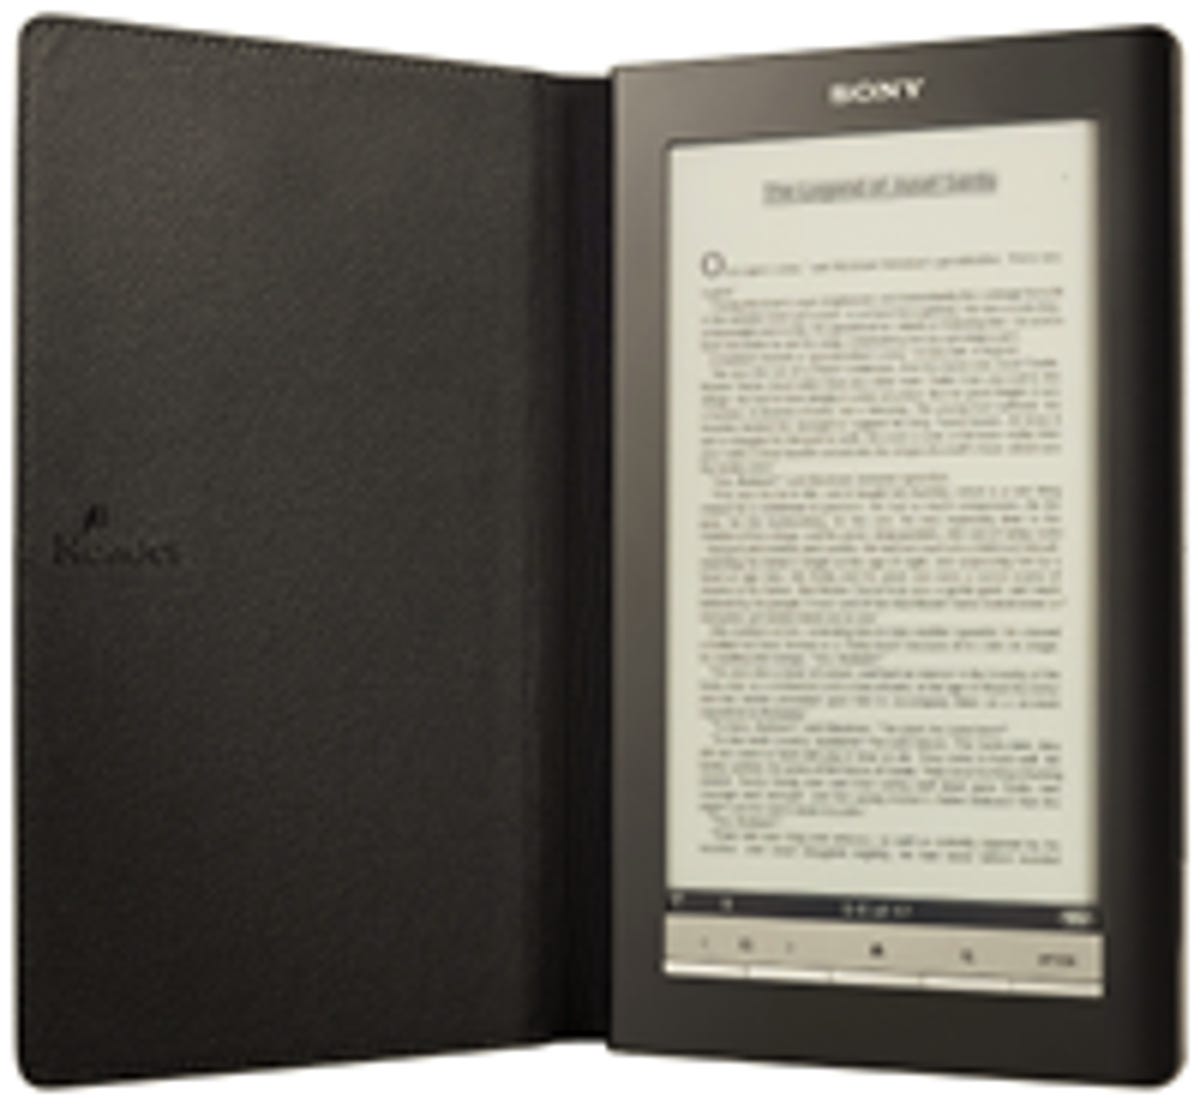 Sony's Reader will hit more global markets.